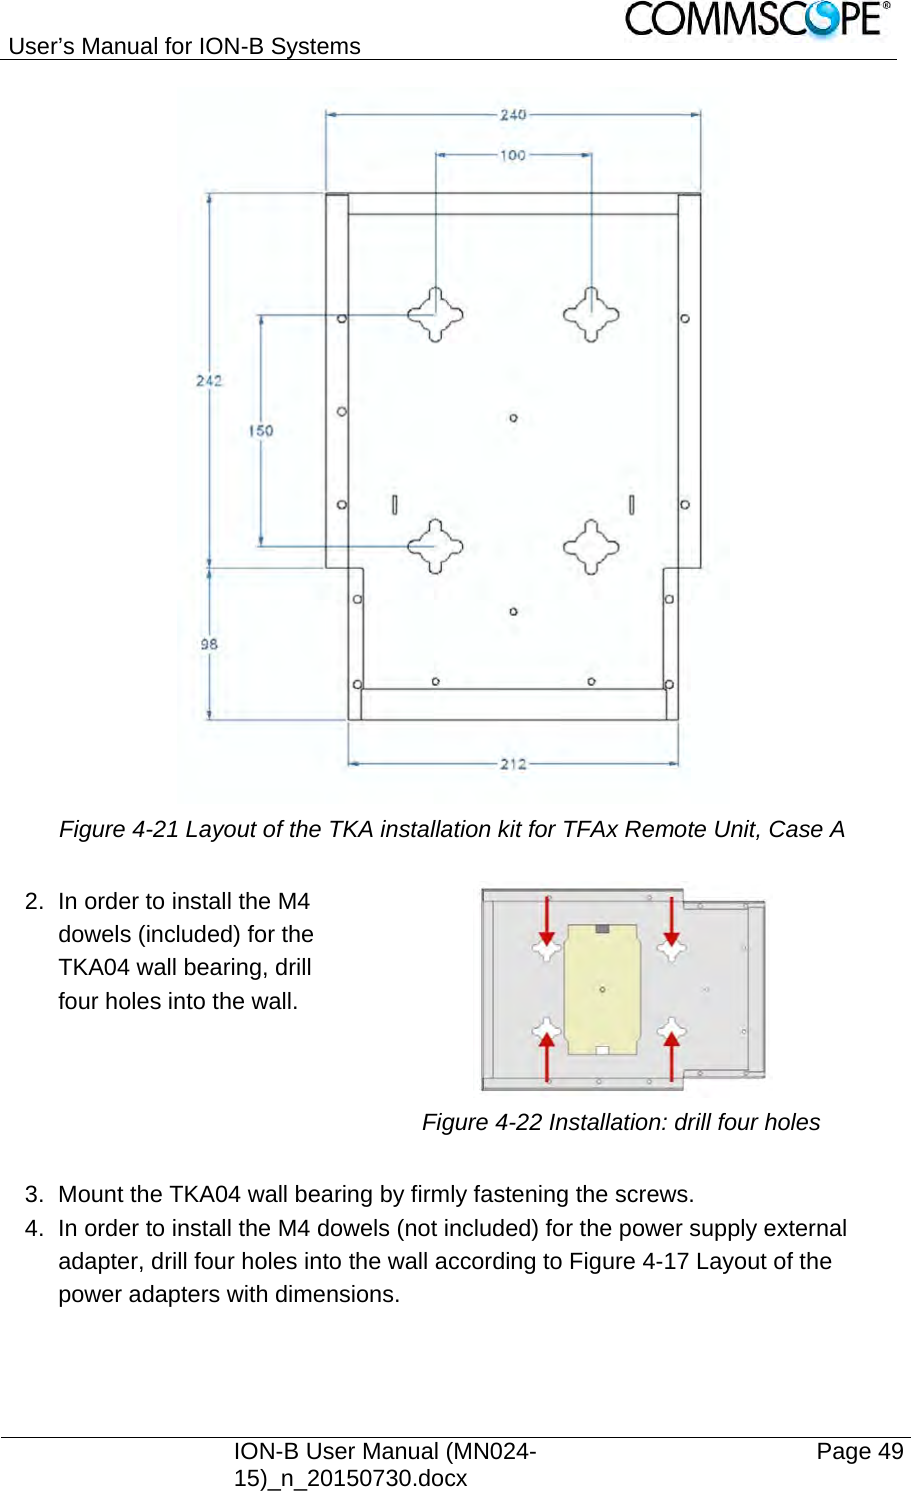 User’s Manual for ION-B Systems    ION-B User Manual (MN024-15)_n_20150730.docx  Page 49  Figure 4-21 Layout of the TKA installation kit for TFAx Remote Unit, Case A  2.  In order to install the M4 dowels (included) for the TKA04 wall bearing, drill four holes into the wall.    Figure 4-22 Installation: drill four holes   3.  Mount the TKA04 wall bearing by firmly fastening the screws. 4.  In order to install the M4 dowels (not included) for the power supply external adapter, drill four holes into the wall according to Figure 4-17 Layout of the power adapters with dimensions.    